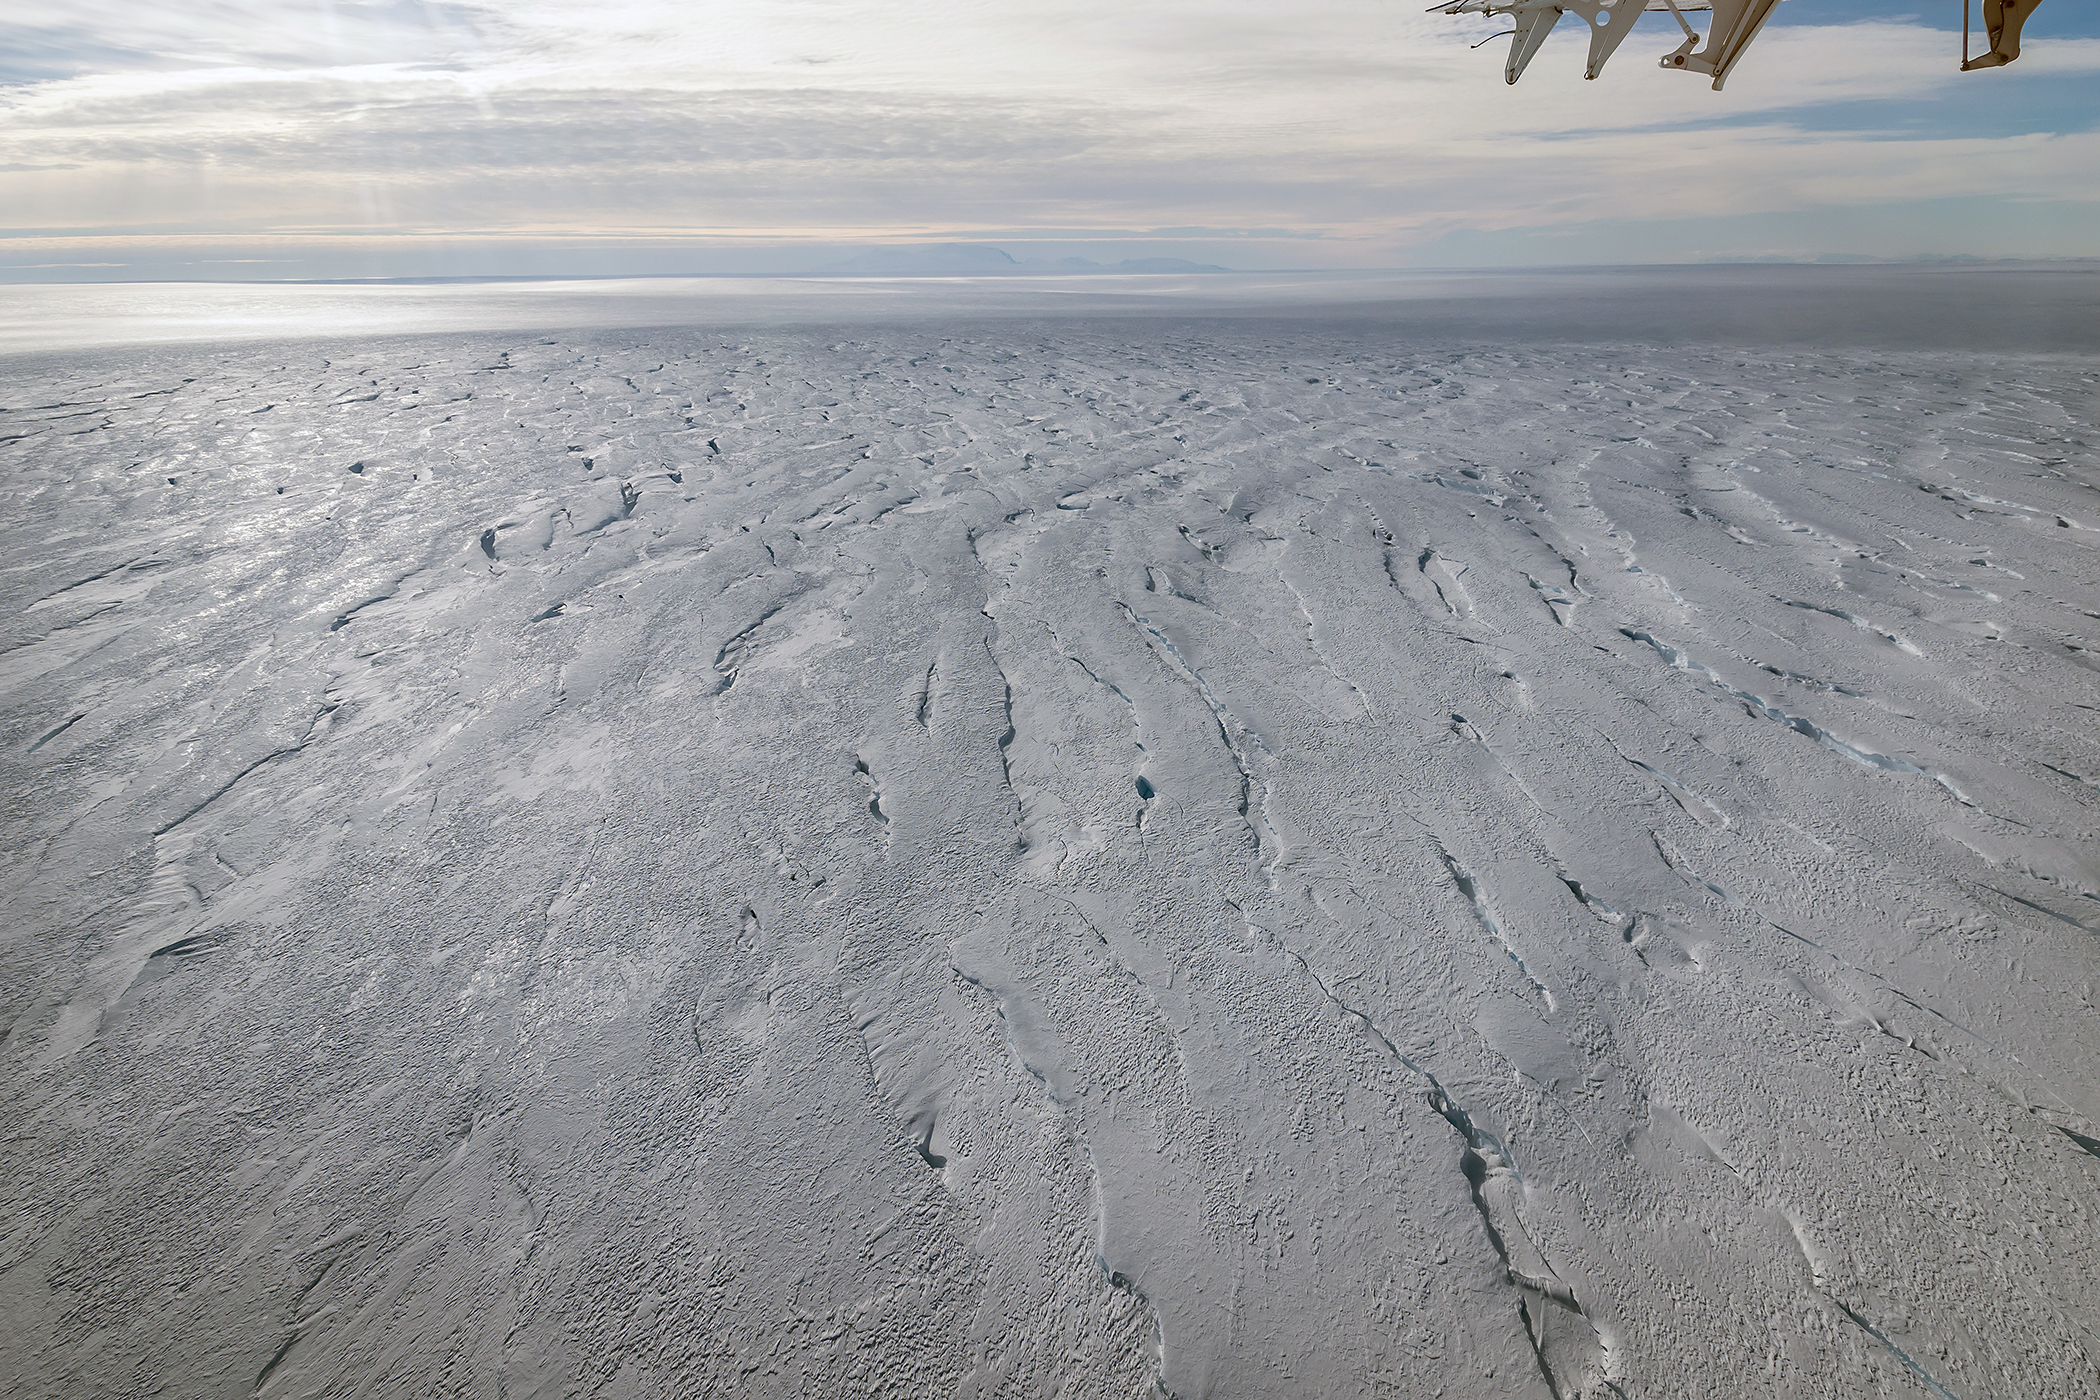 The Thwaites Glacier in West Antarctica (photo by the National Science Foundation)